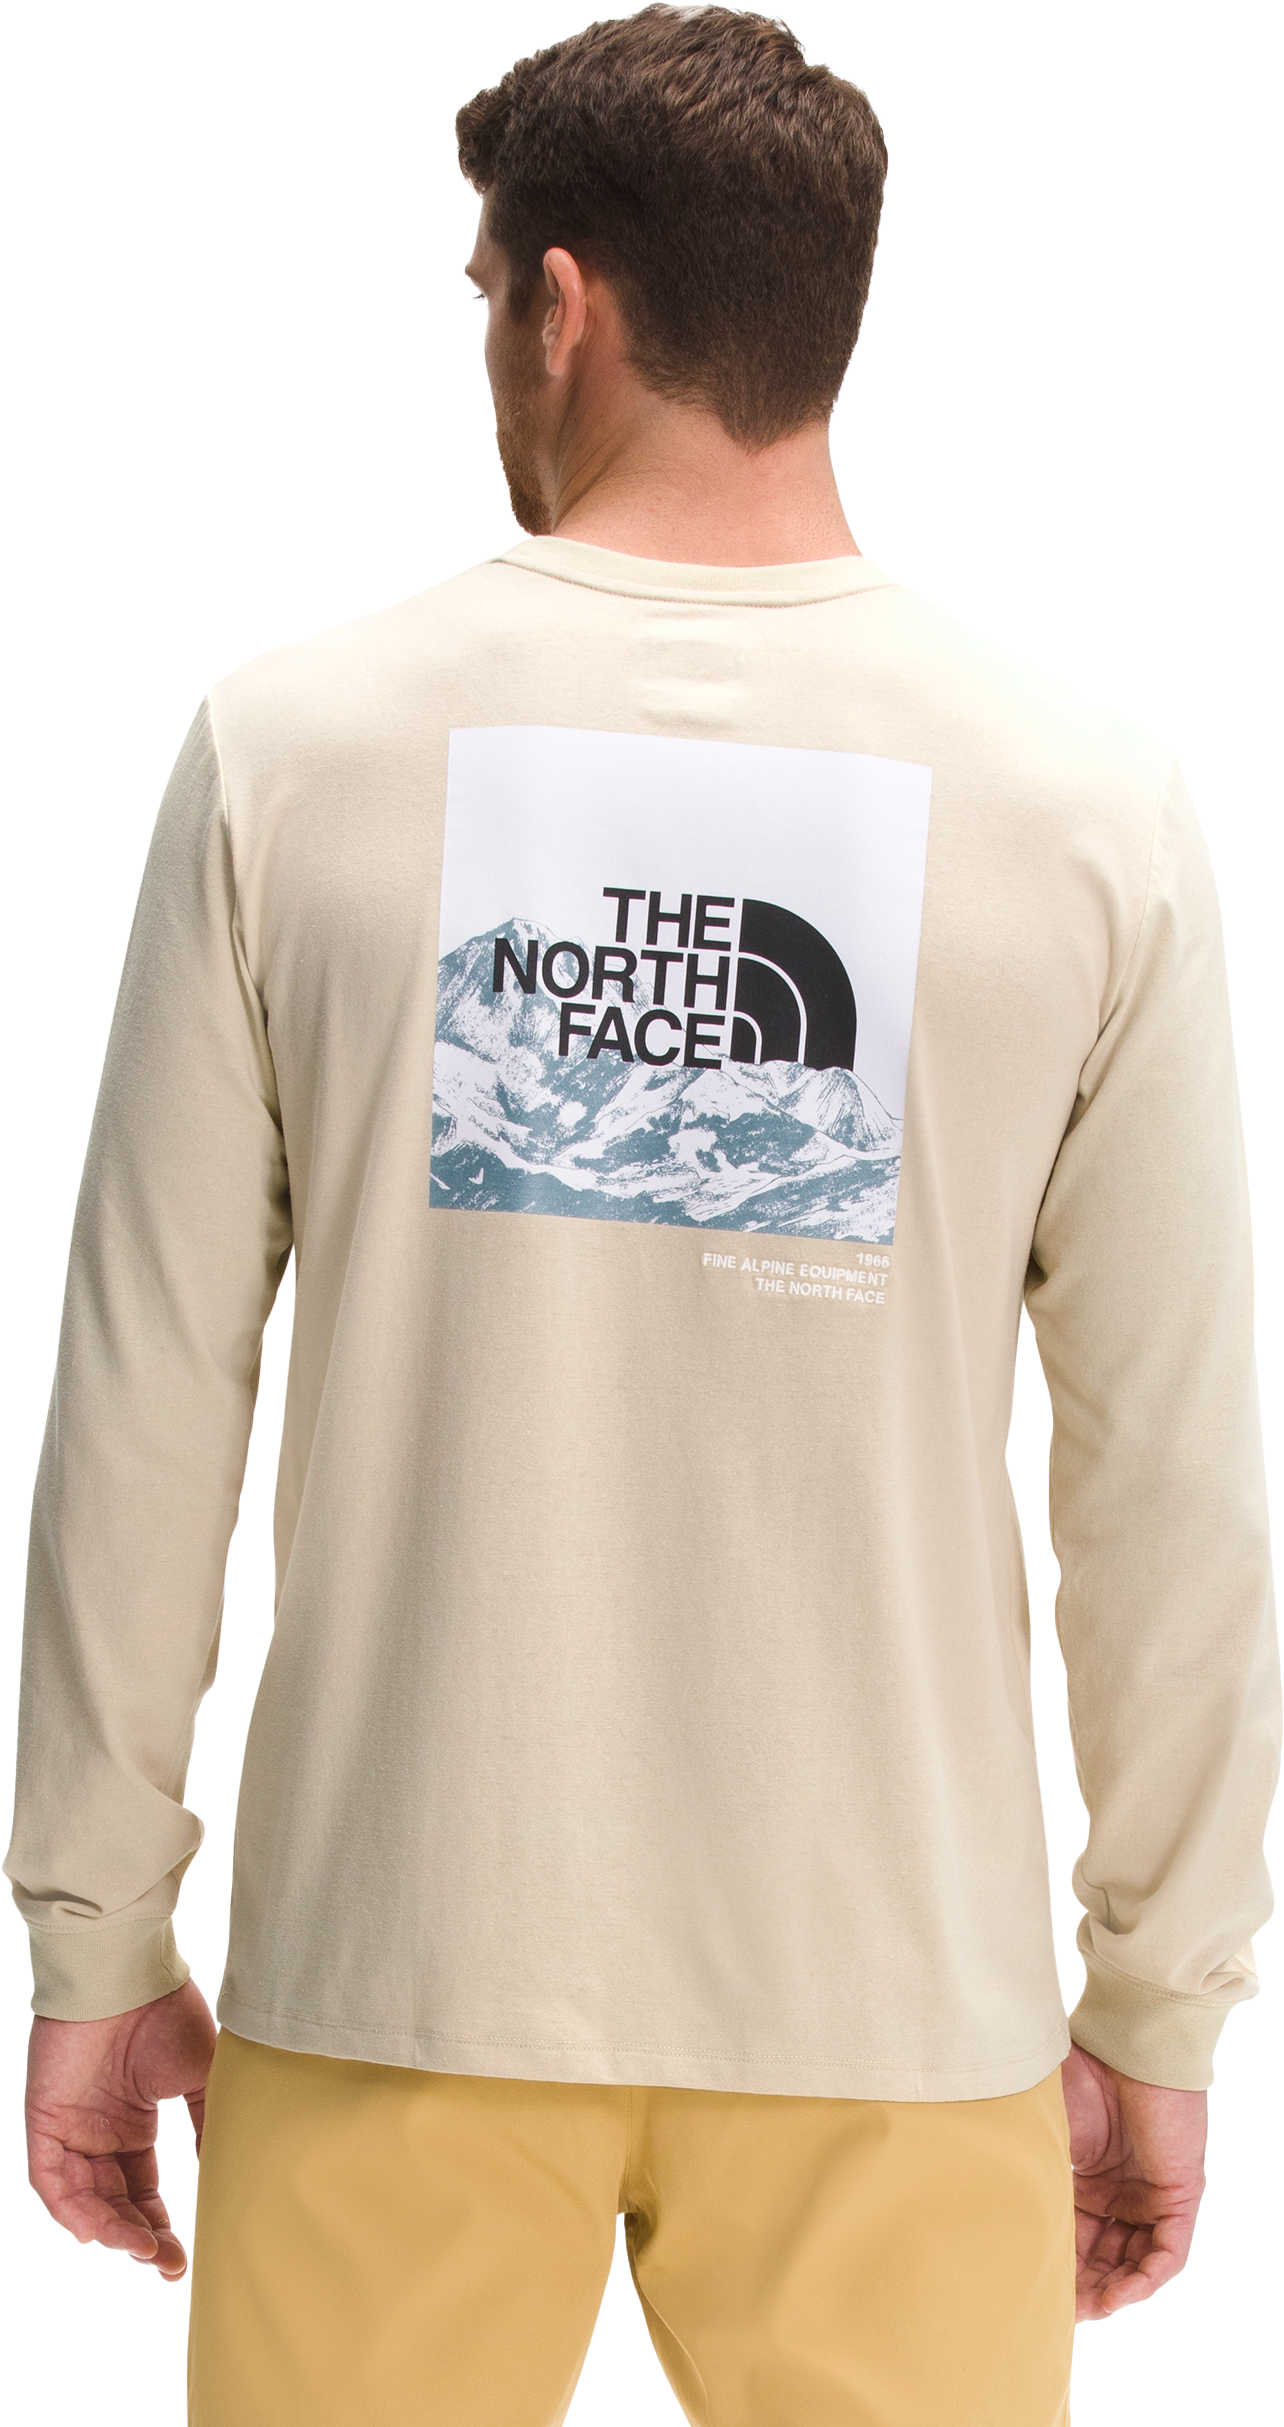 The North Face Logo Play Long-Sleeve T-Shirt for Men - Gravel - 2XL